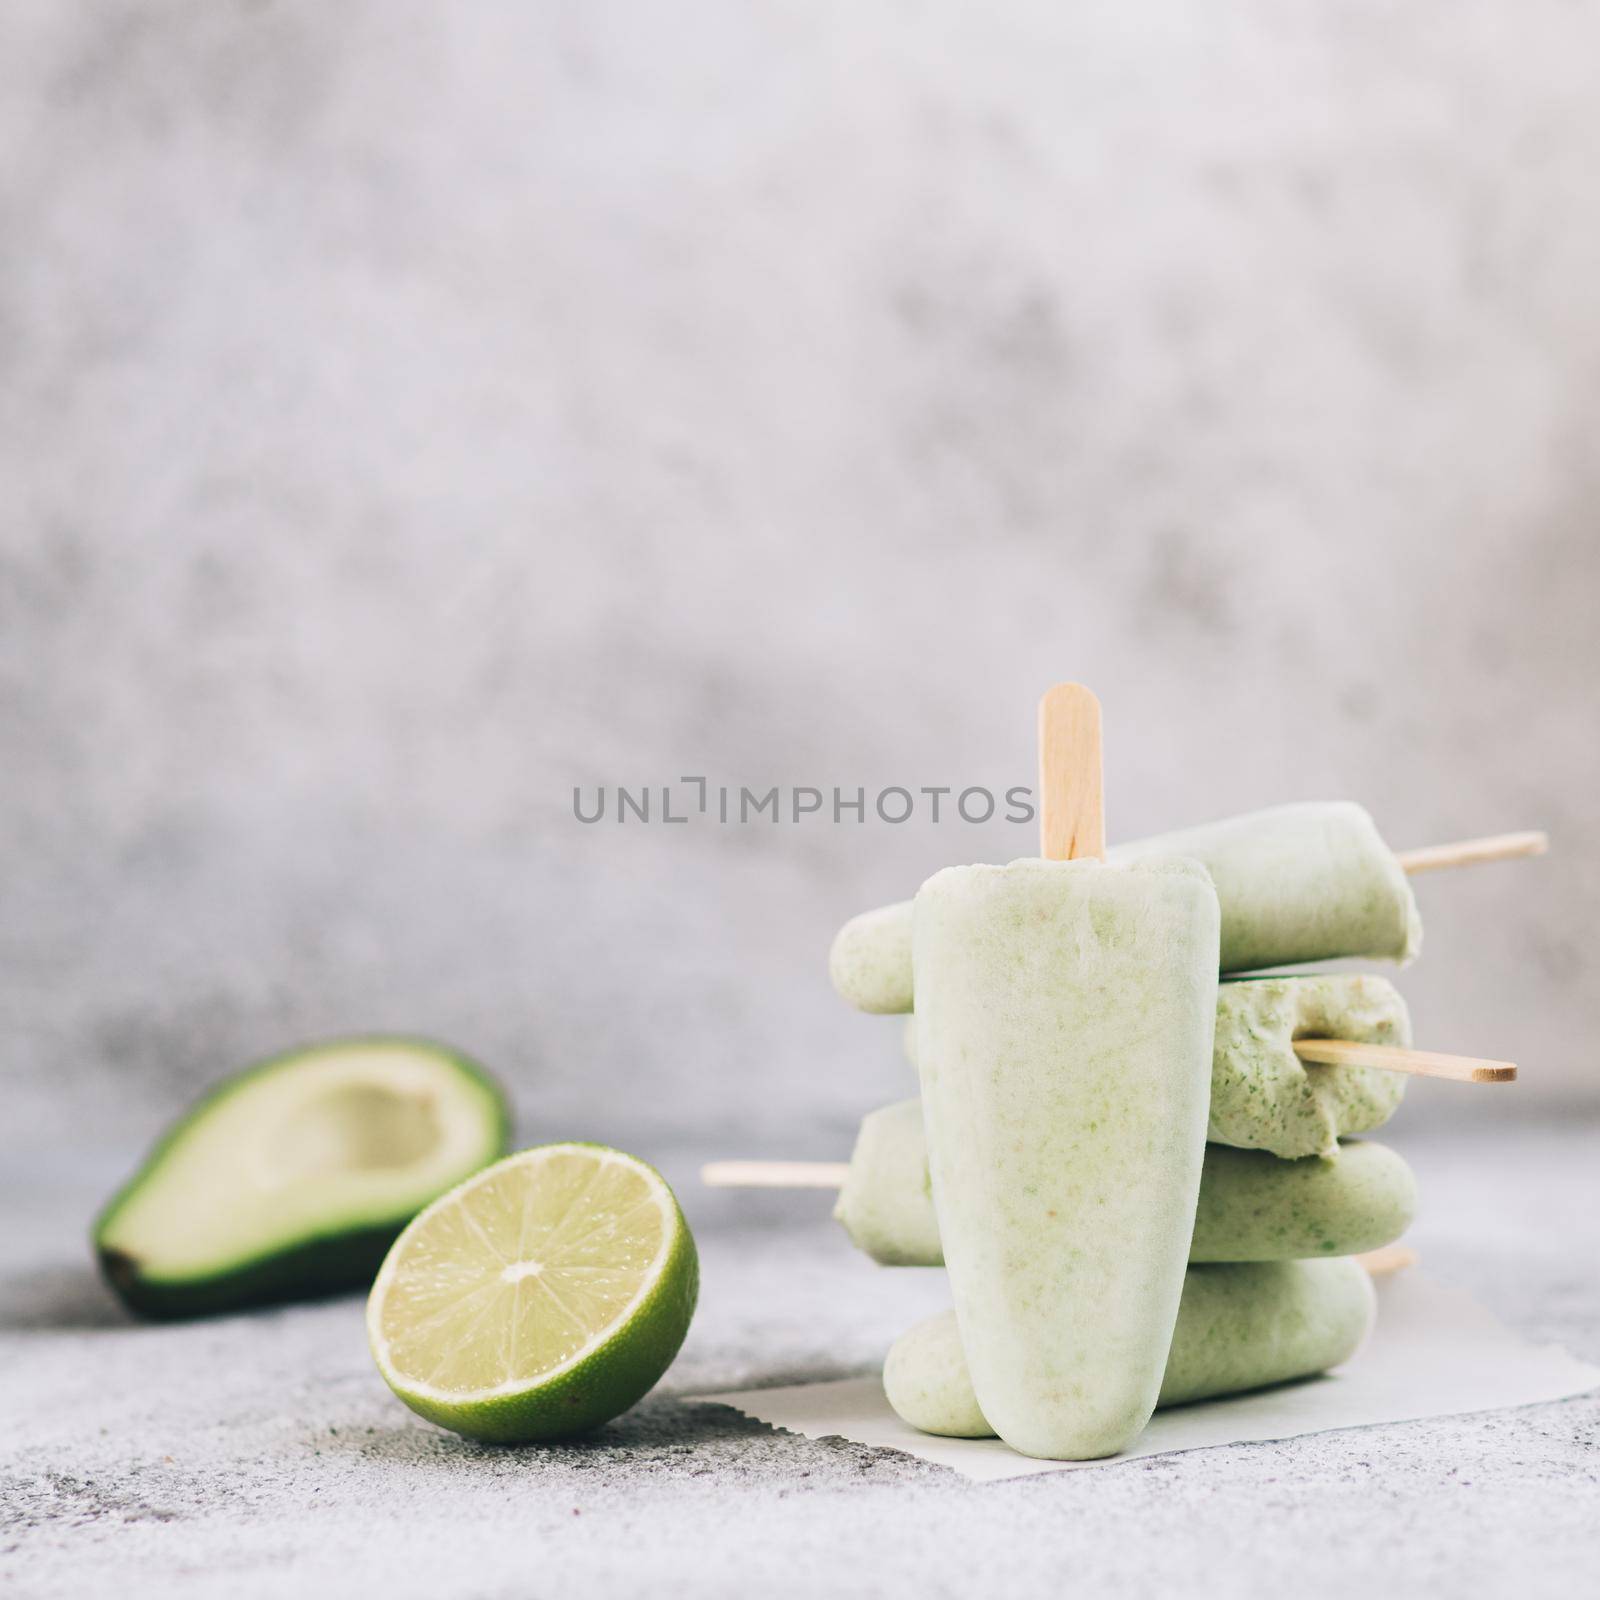 Homemade raw vegan avocado lime popsicle. Sugar-free, non-dairy green ice cream on gray cement textured background. Copy space. Ideas and recipes for healthy snack, dessert or smoothie